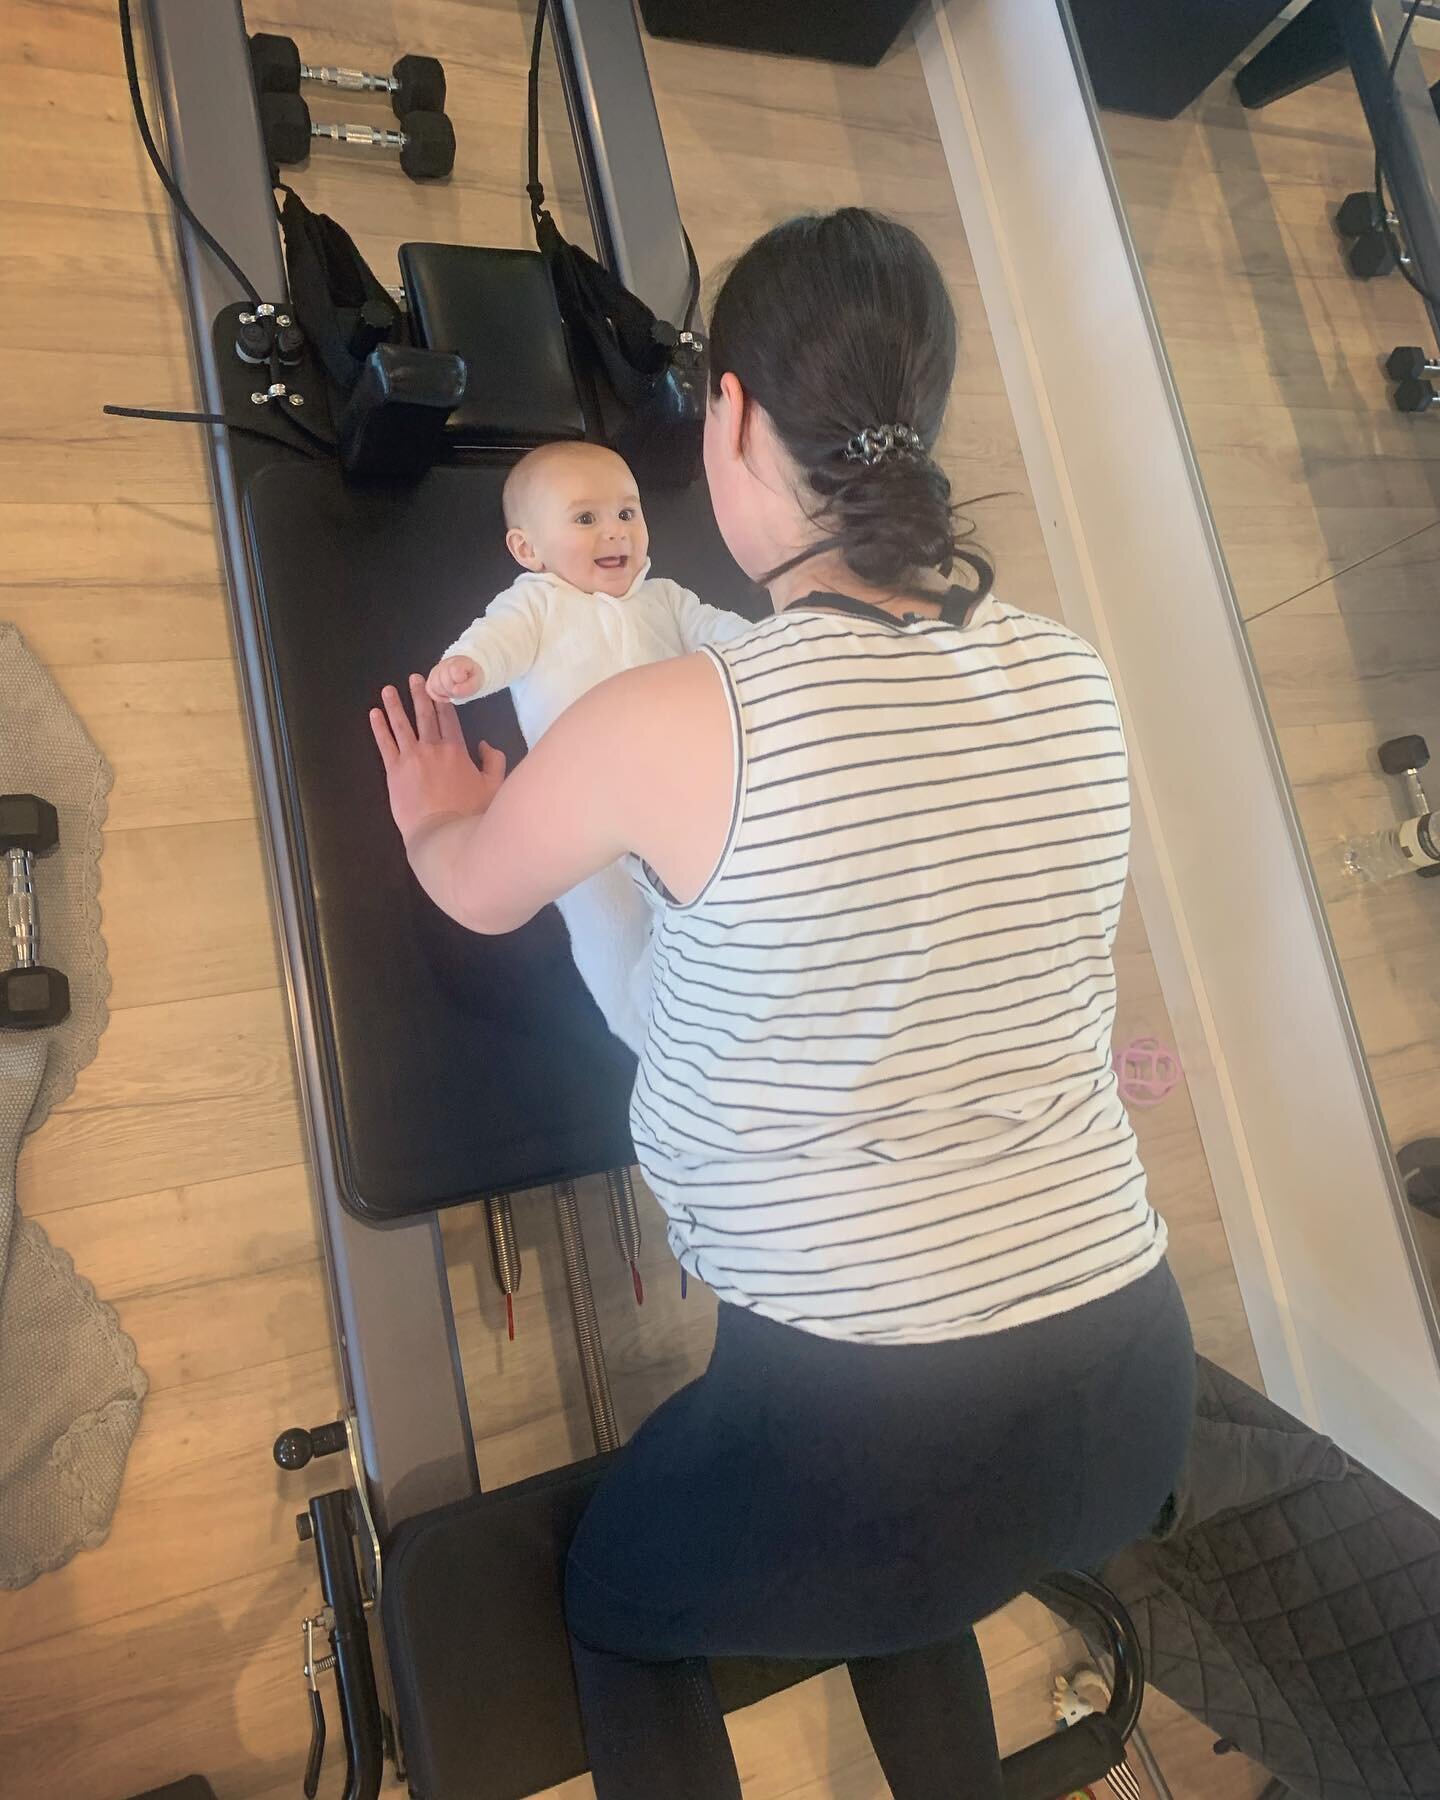 Nothing better than a giggly bubba to make the exercise feel 10X more enjoyable 🥰🥰

Bring your bubs to Reformer on Wednesdays and Fridays at 10:30AM!